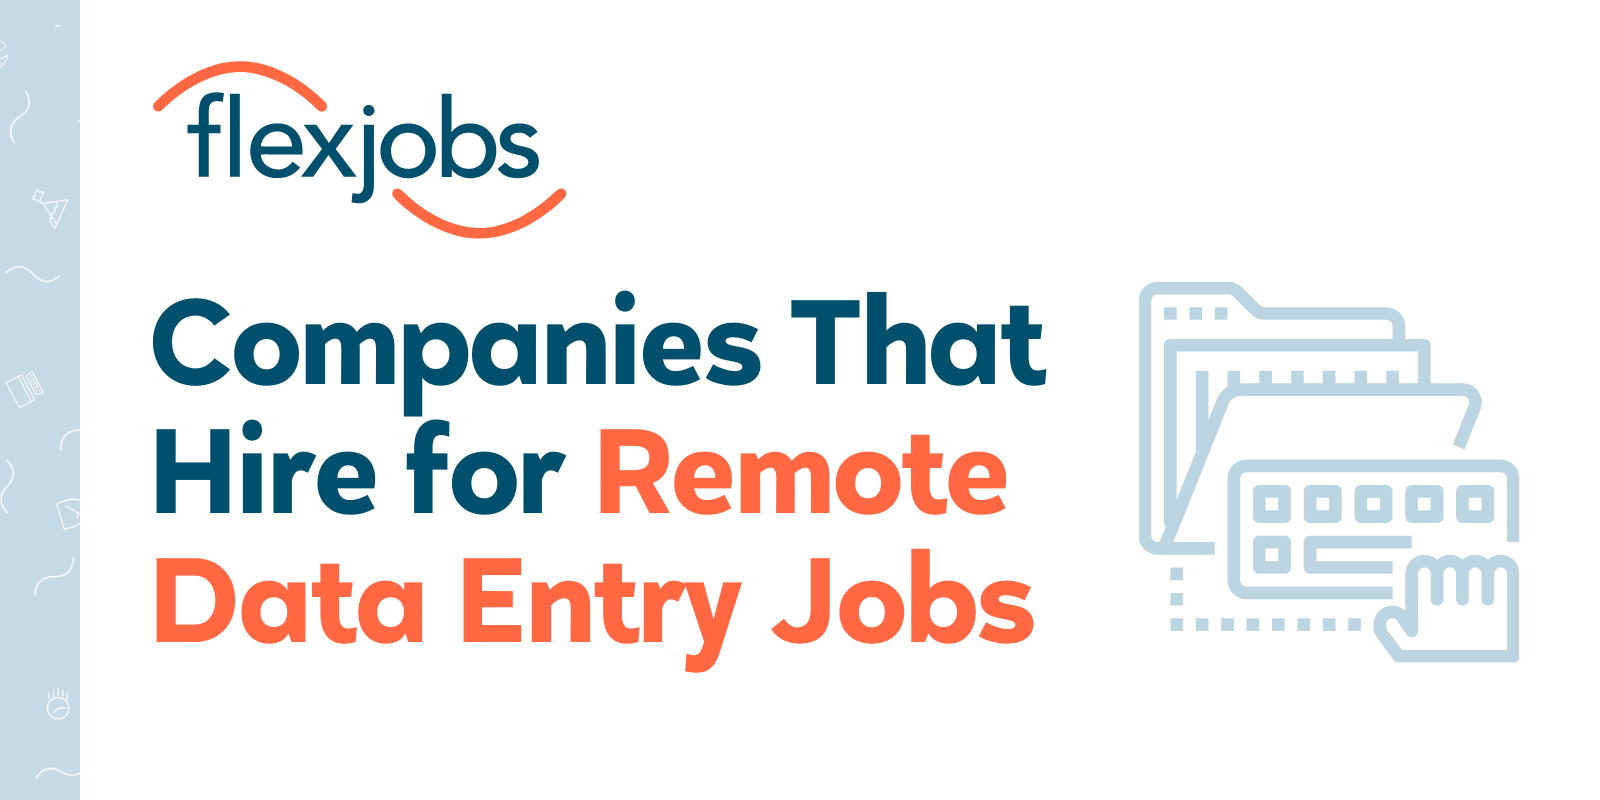 Online Data Entry Jobs Hiring – How To Apply?